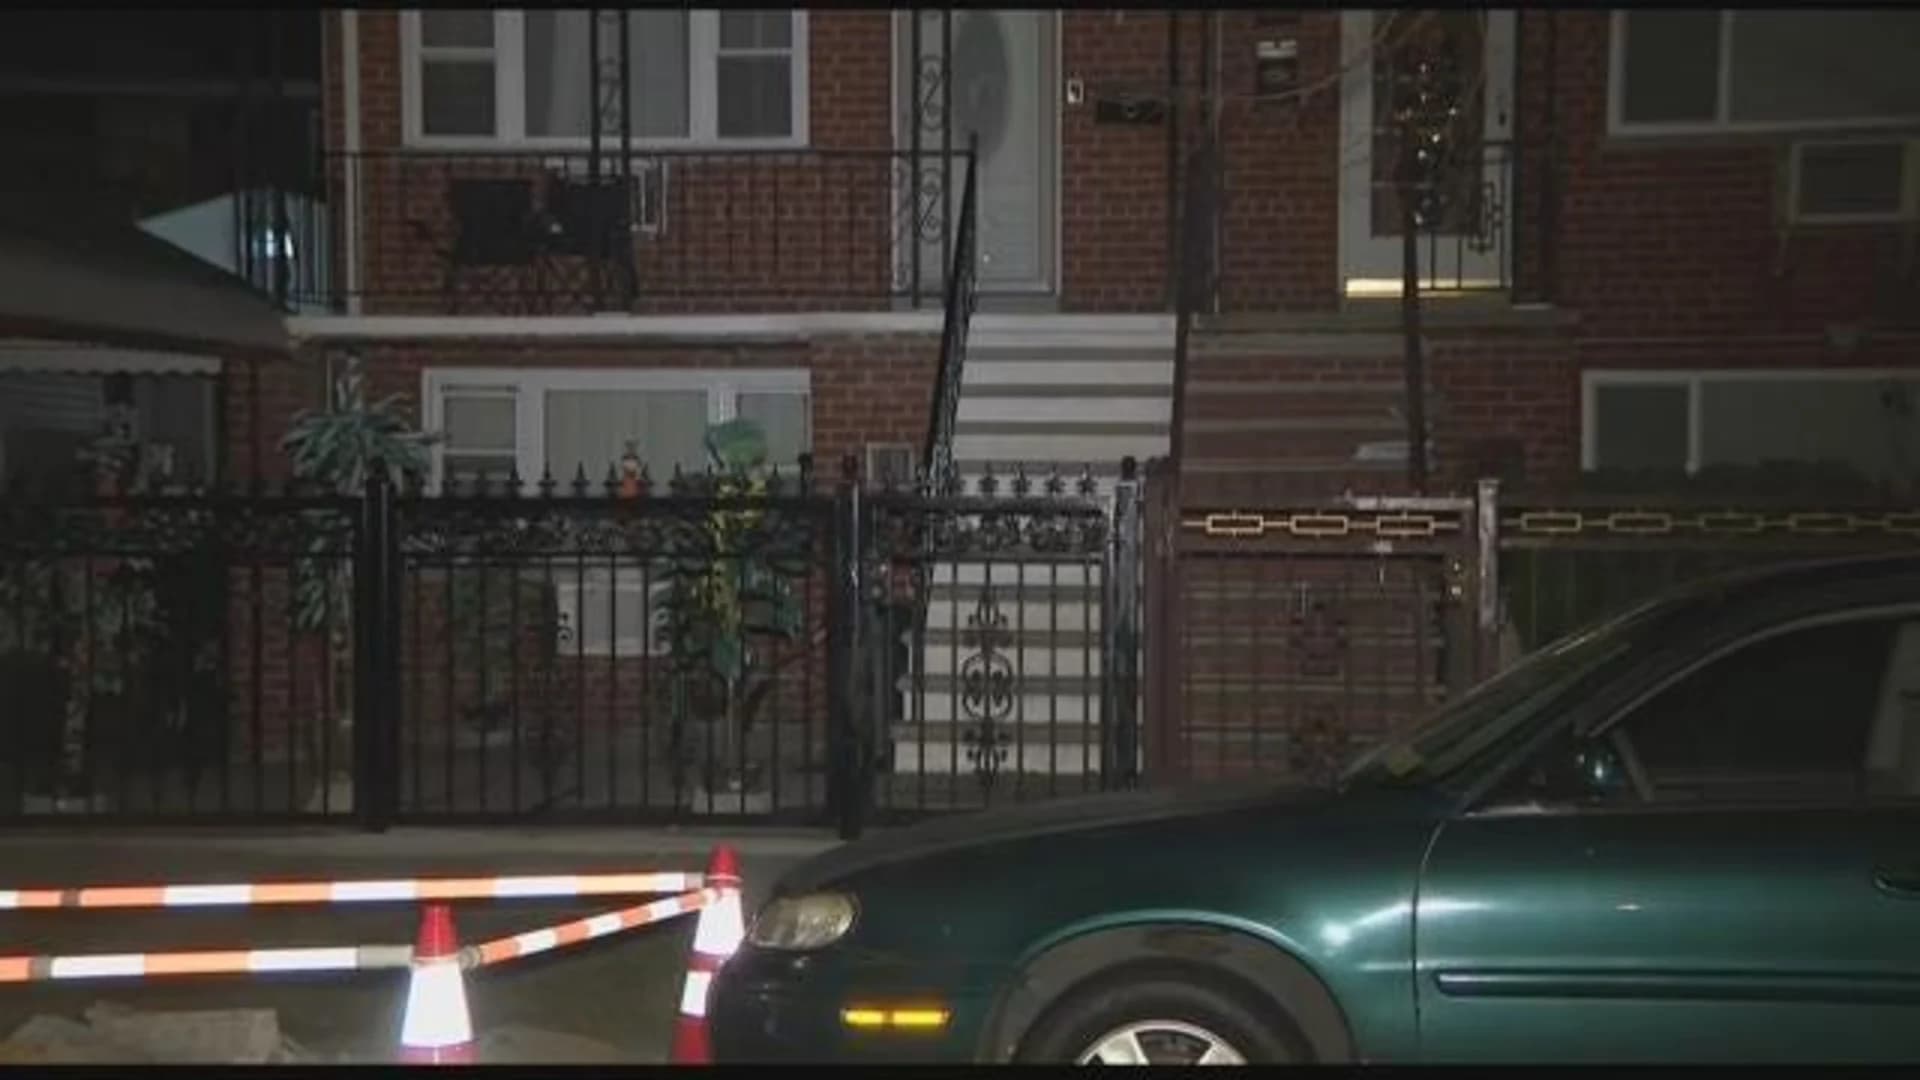 Police: 2 found dead in Throgs Neck home after wellness check request